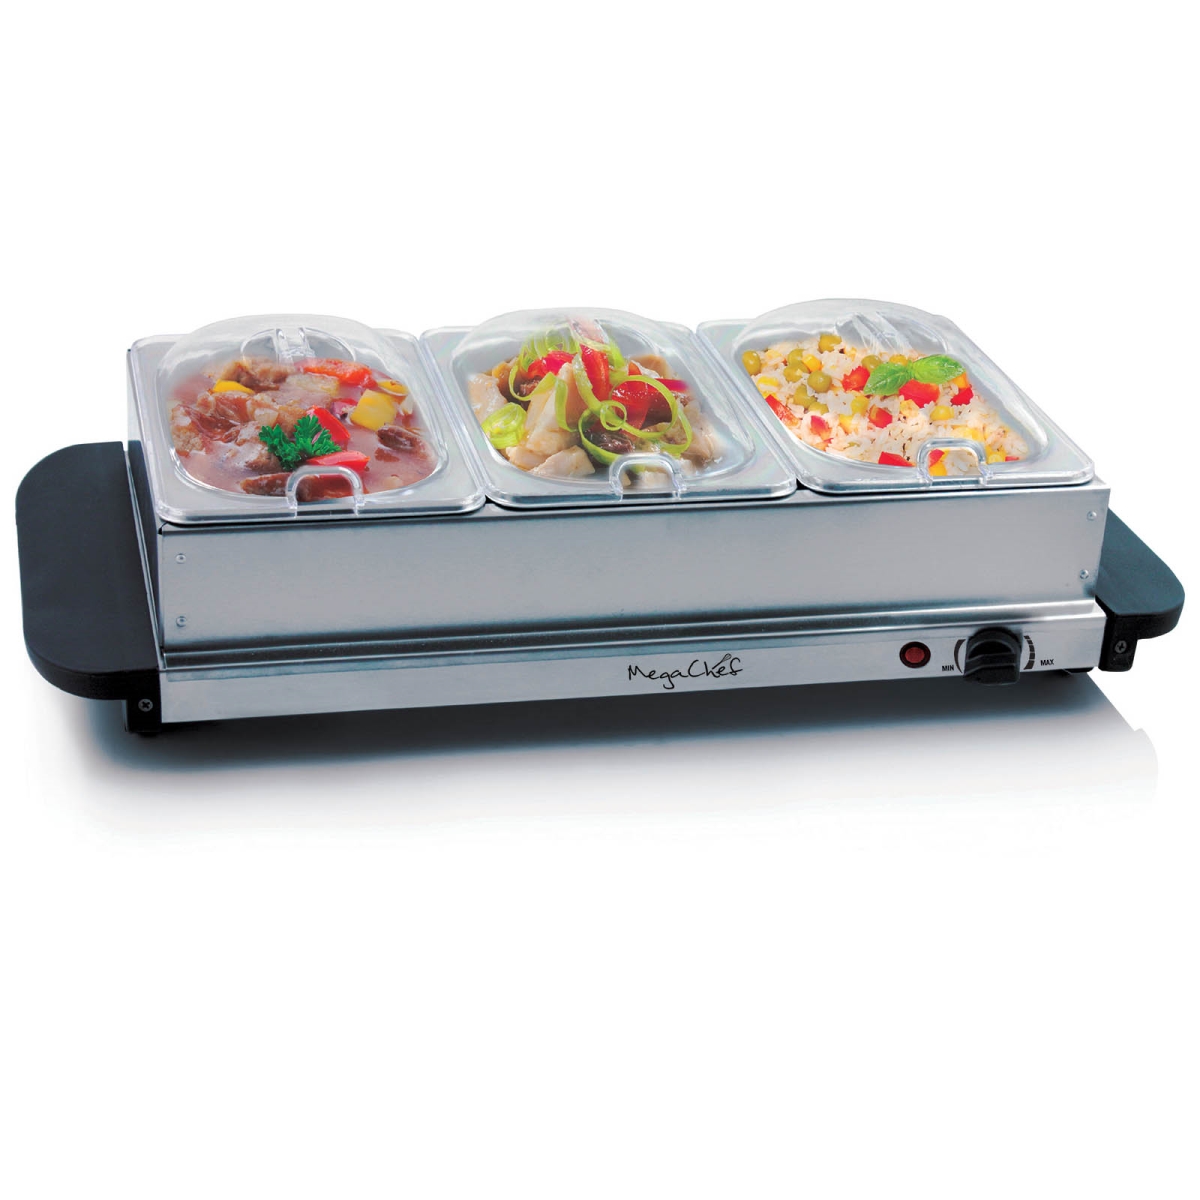 Mc-9003b Buffet Server & Food Warmer With 3 Removable Sectional Trays, Heated Warming Tray & Removable Tray Frame